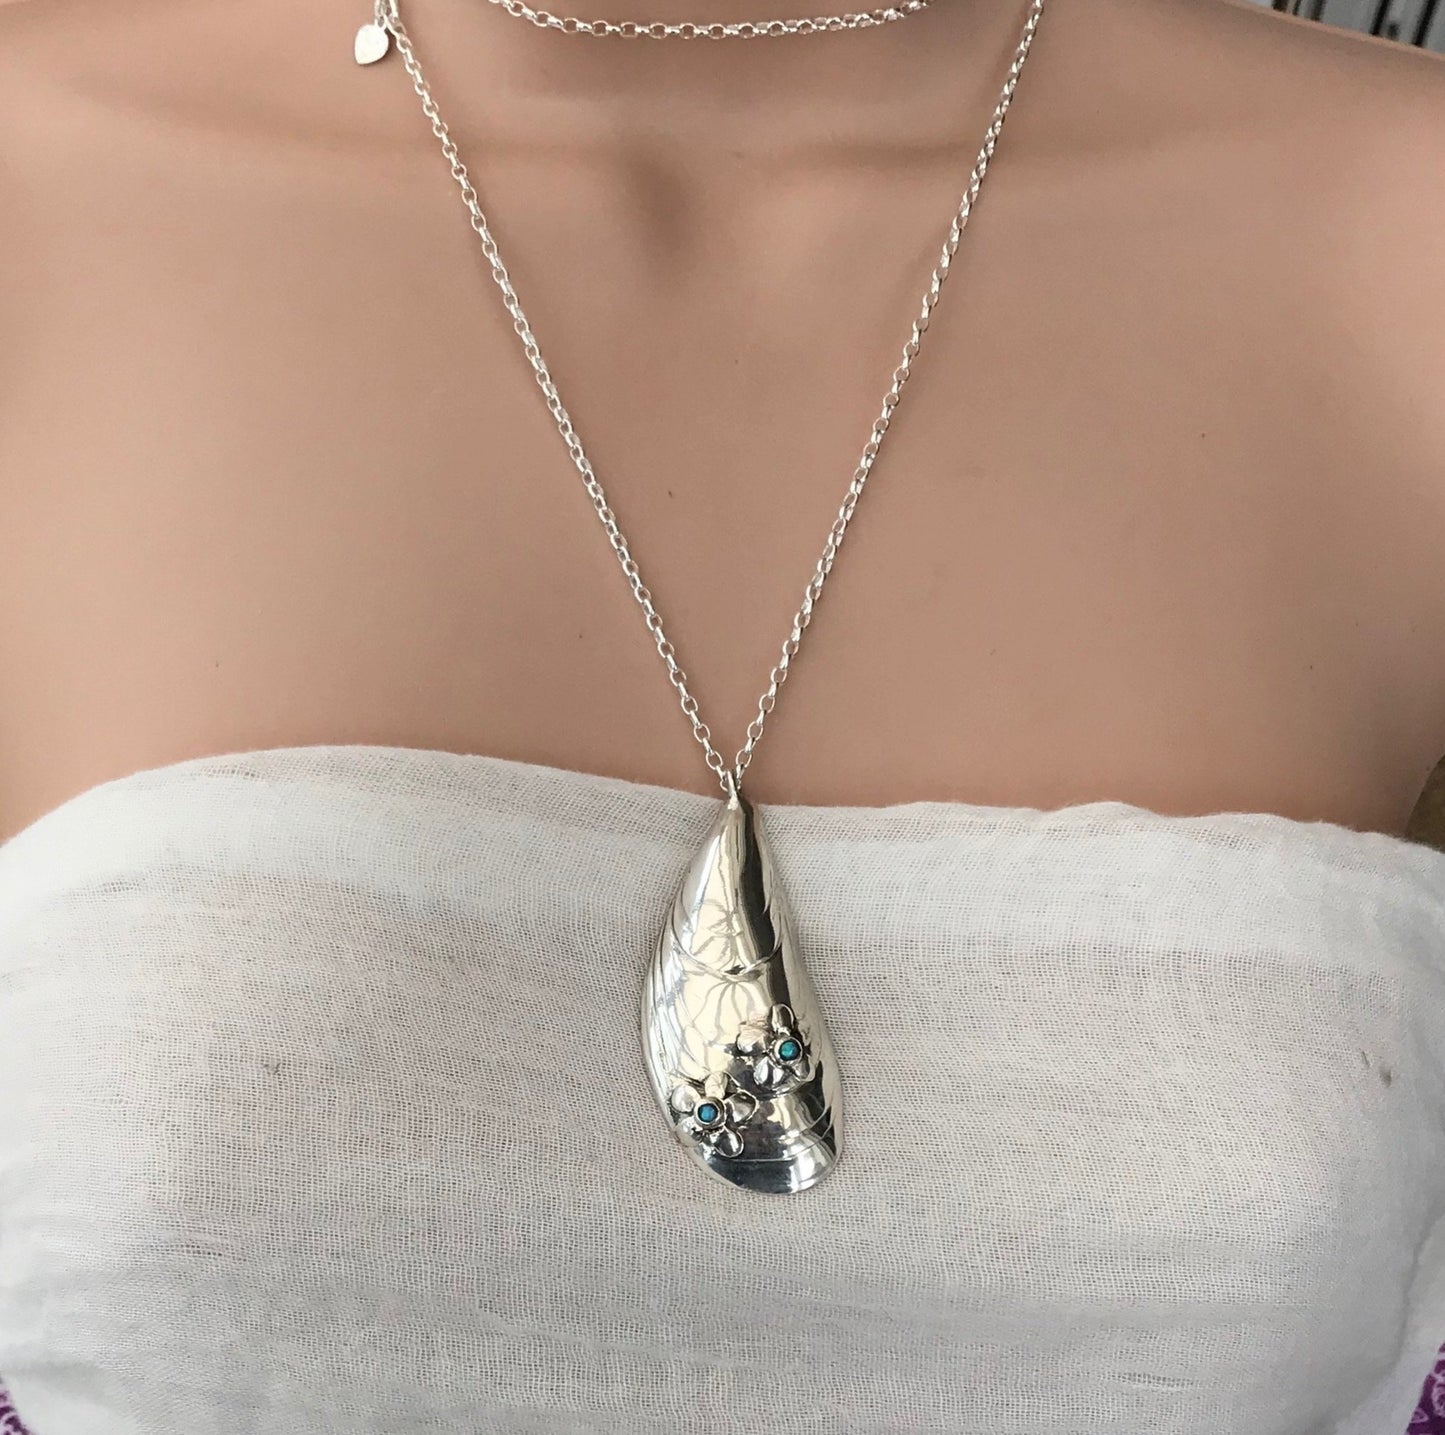 mussel necklace with flowers